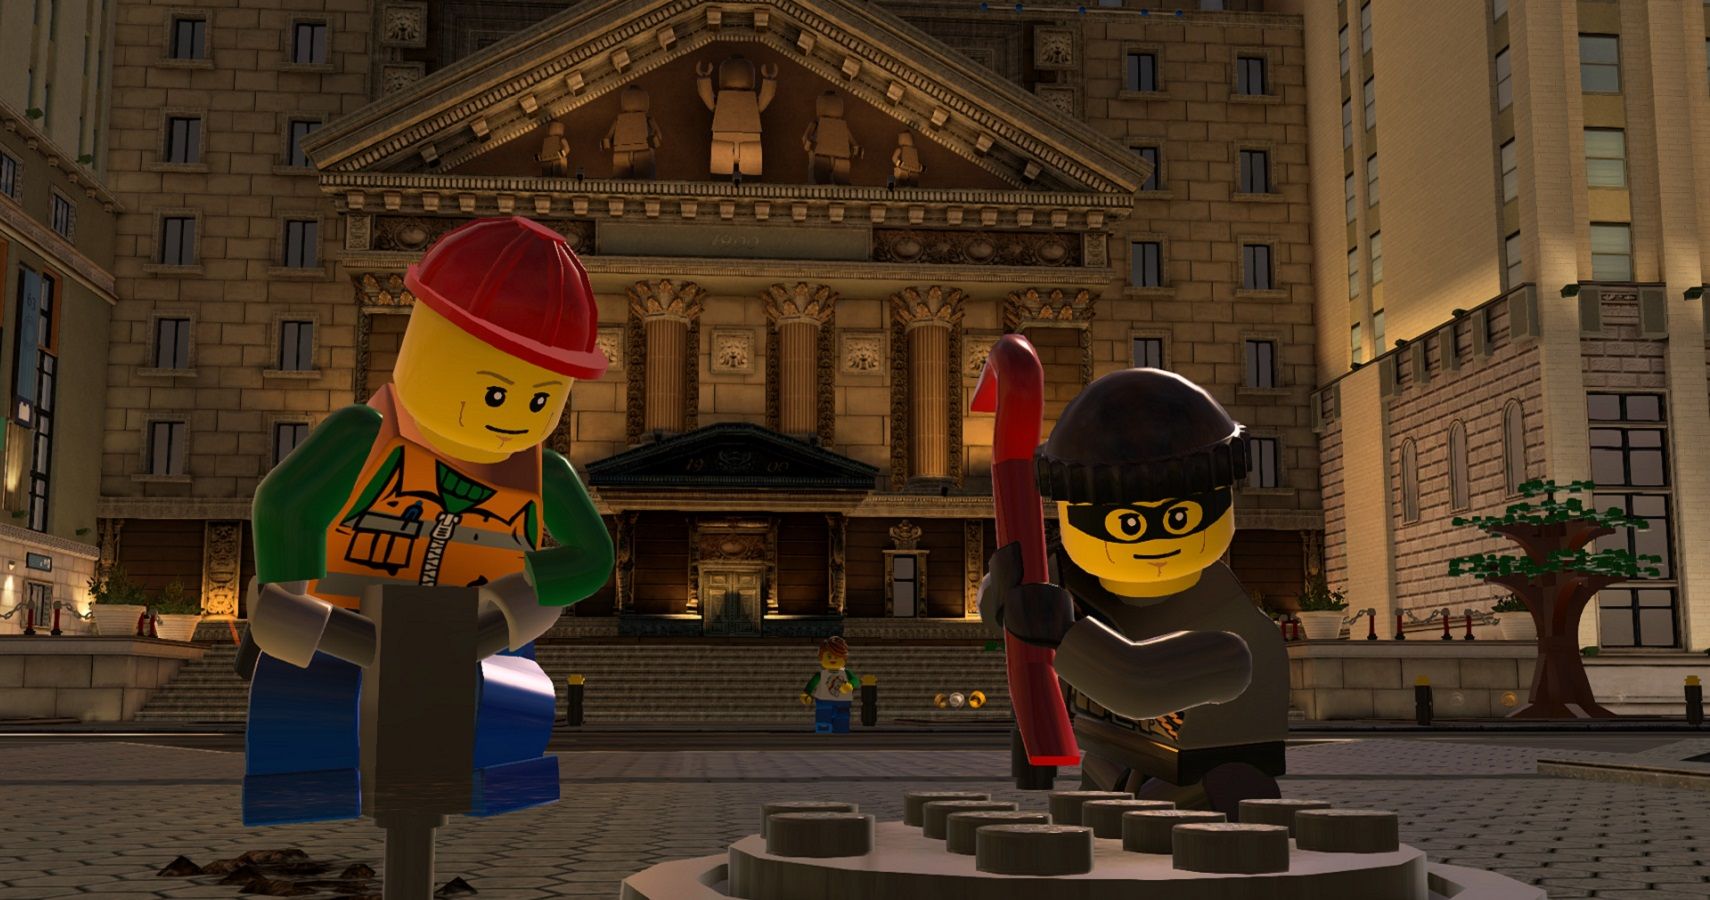 Lego City Undercover Delisted From Wii U And 3ds Eshop